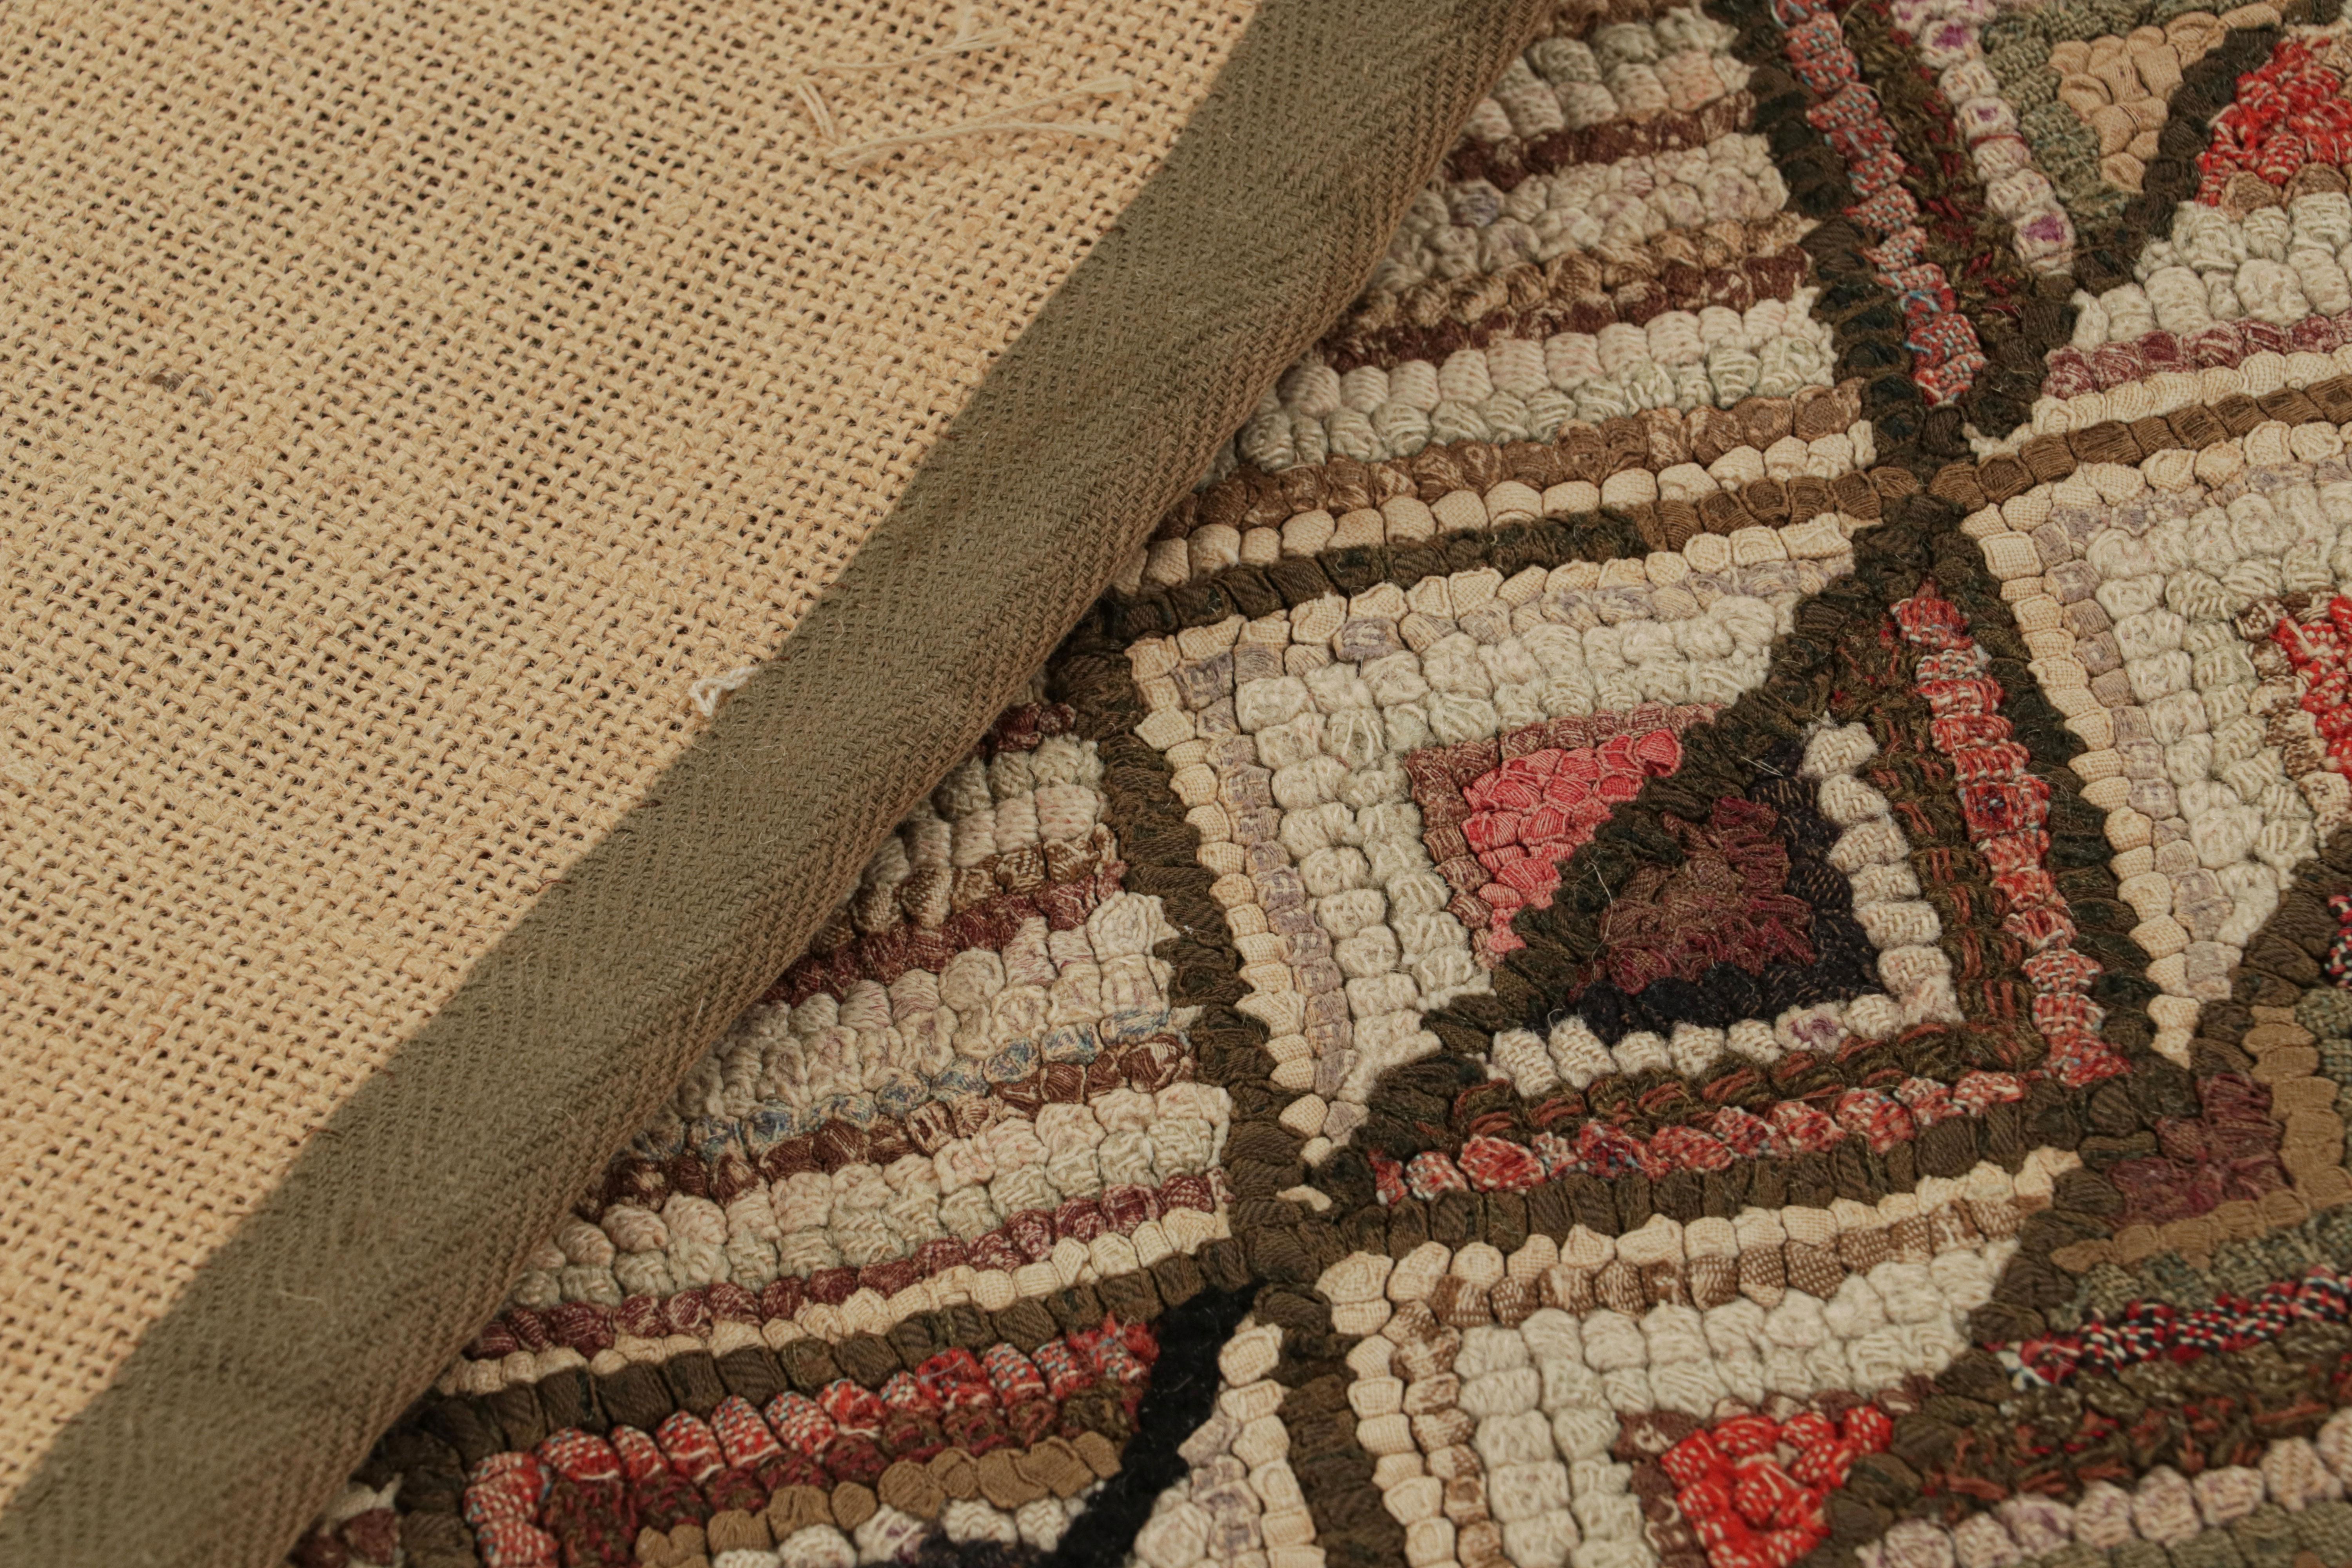 Wool Antique Hooked Rug with Beige-Brown Geometric Patterns, from Rug & Kilim For Sale